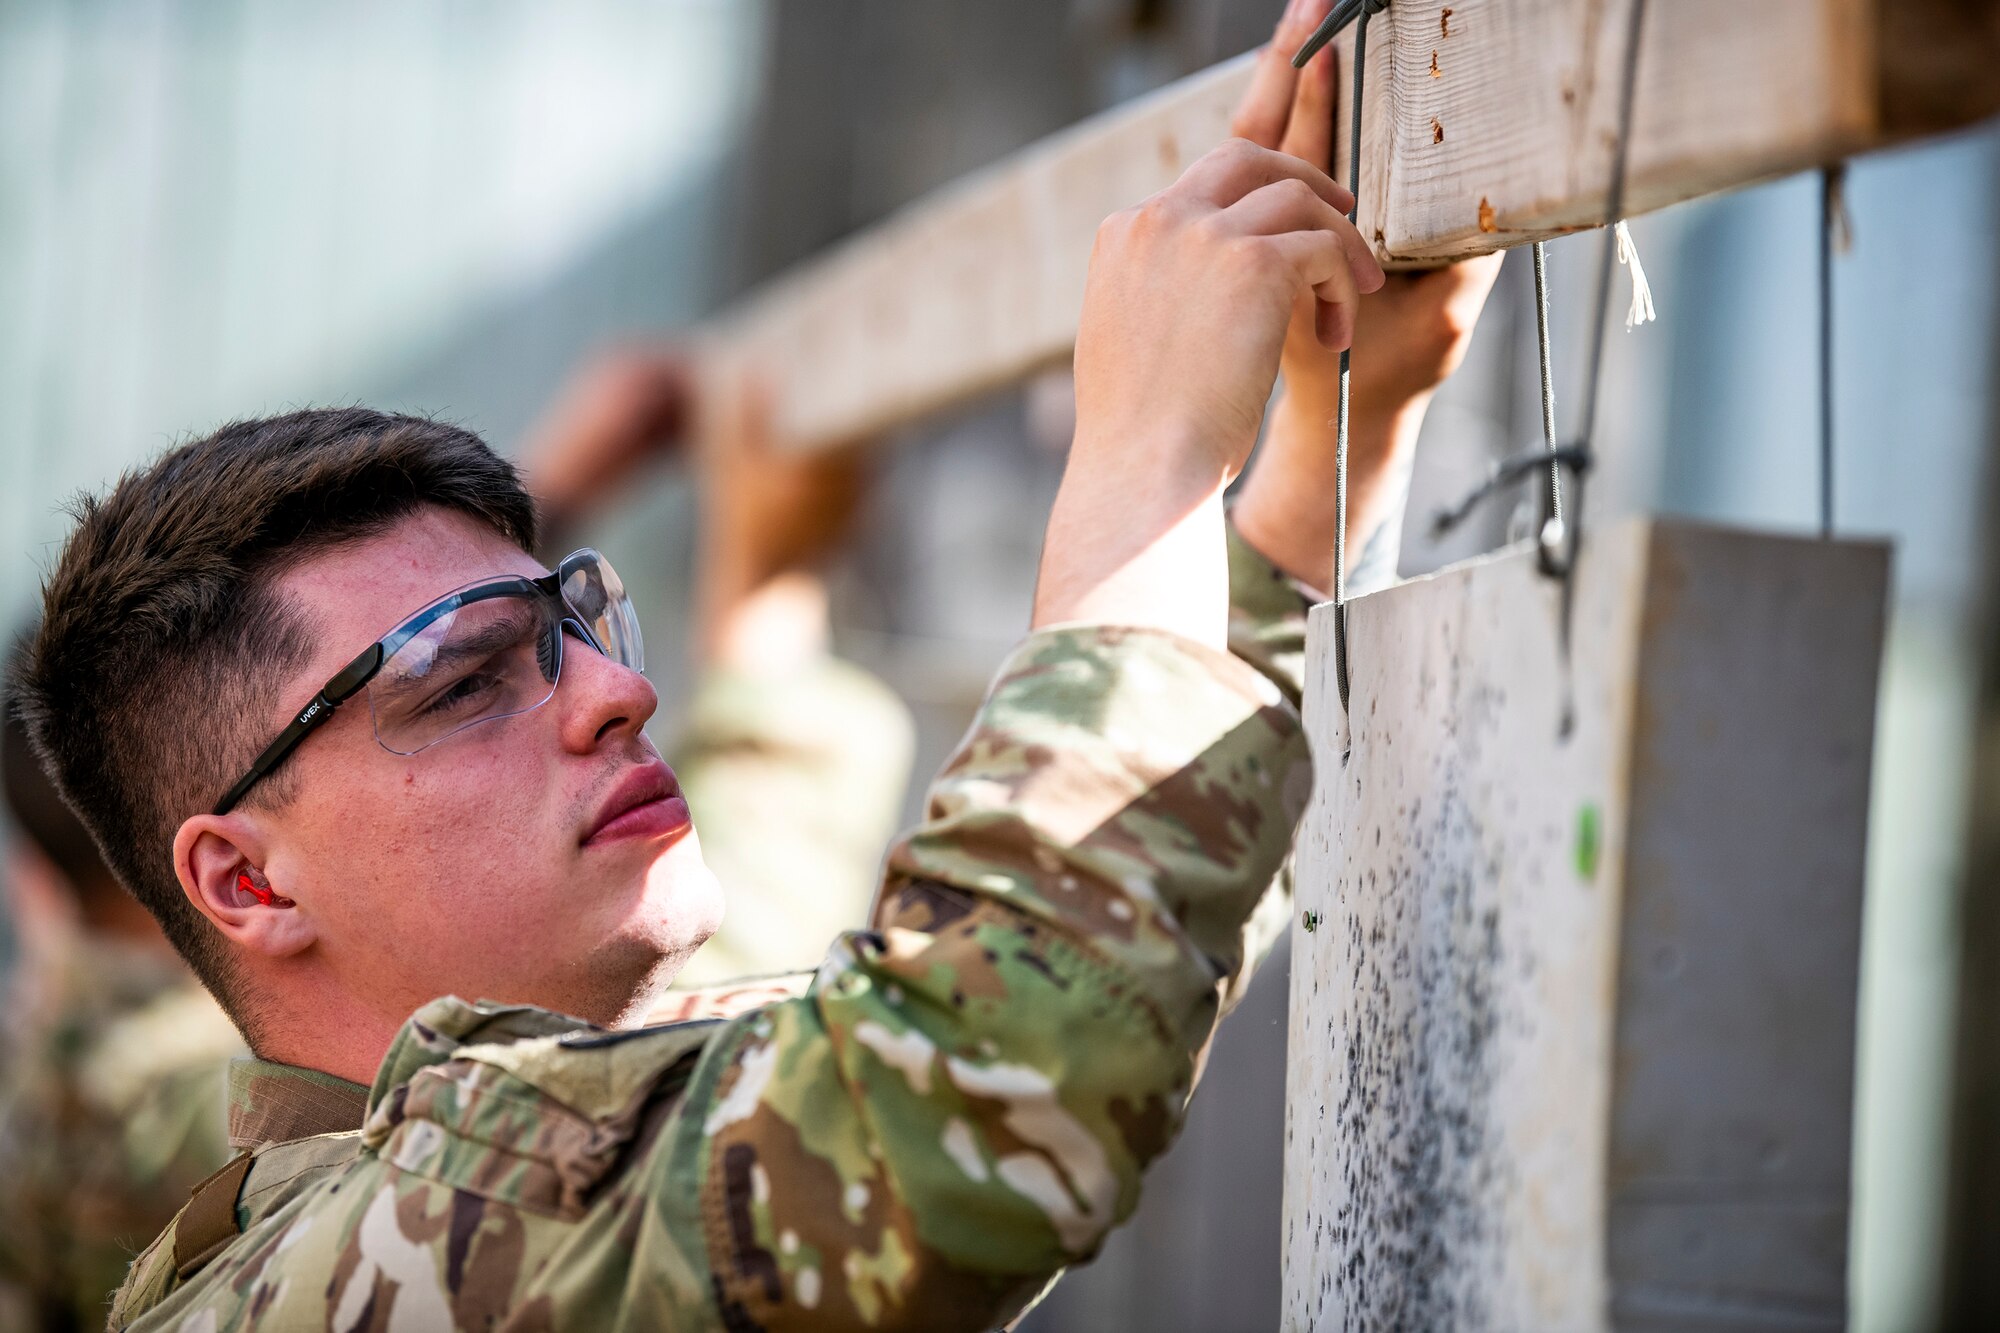 U.S. Air Force Senior Airman Ambrose Ross, 423d Security forces squadron police services, aligns a target sheet during a proficiency course at RAF Molesworth, England, Aug. 19, 2022. During the course instructors from the 820th Base Defense Group and 435th Contingency Response Group provided oversight and guidance to help critique and advance the combat arms skills of the defenders from the 423d SFS. (U.S. Air Force photo by Staff Sgt. Eugene Oliver)